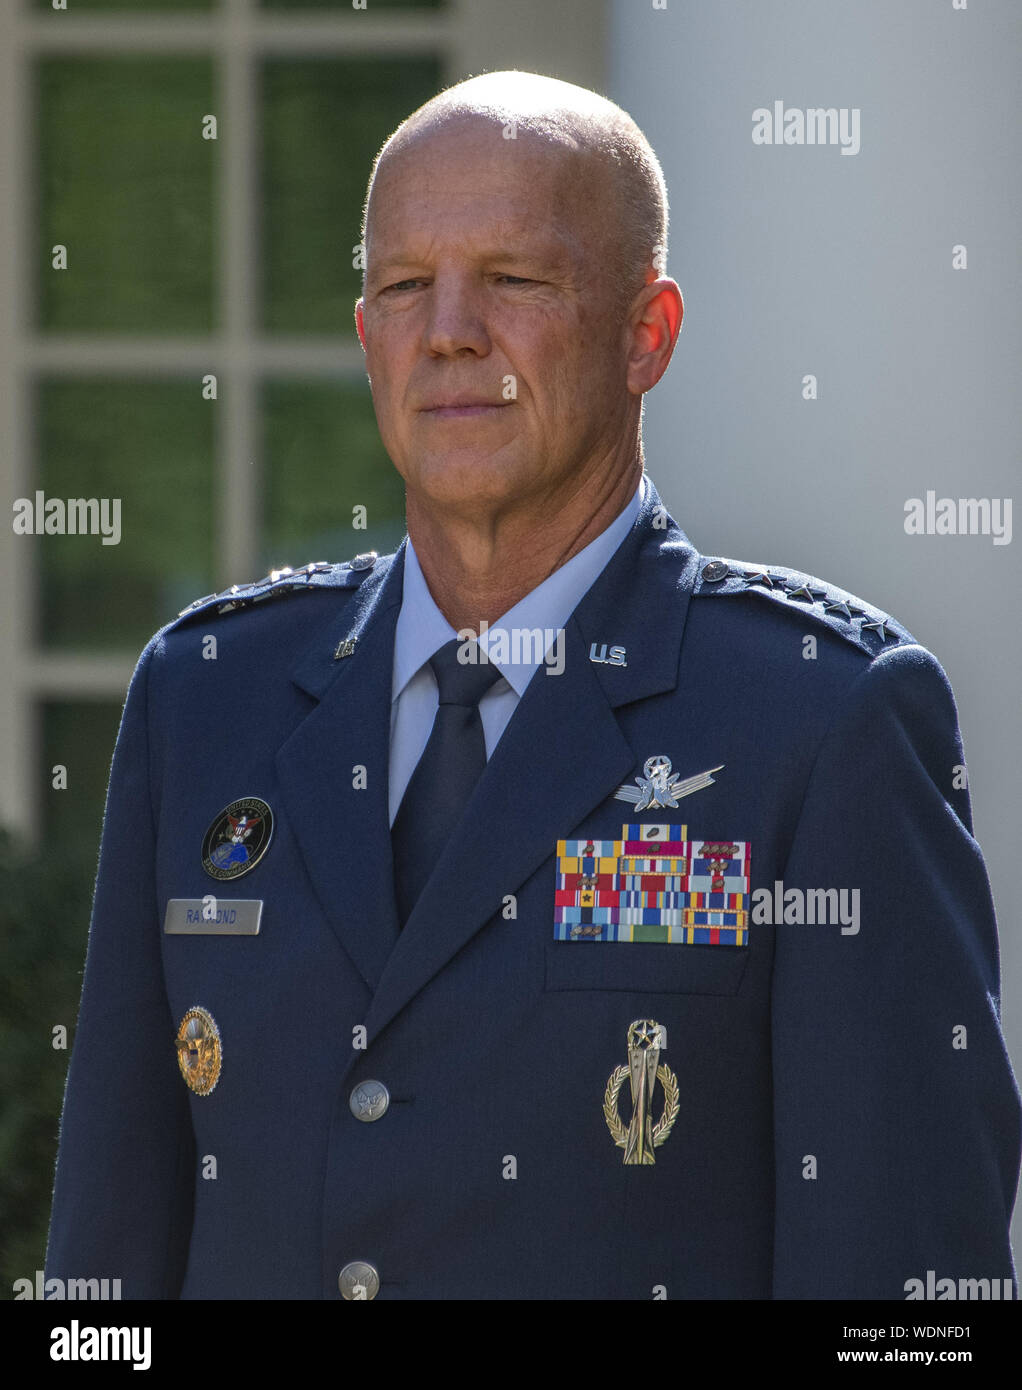 General John W Jay Raymond Commander Air Force Space Command Listens As United States President Donald J Trump Establishes The Us Space Command In The Rose Garden Of The White House In